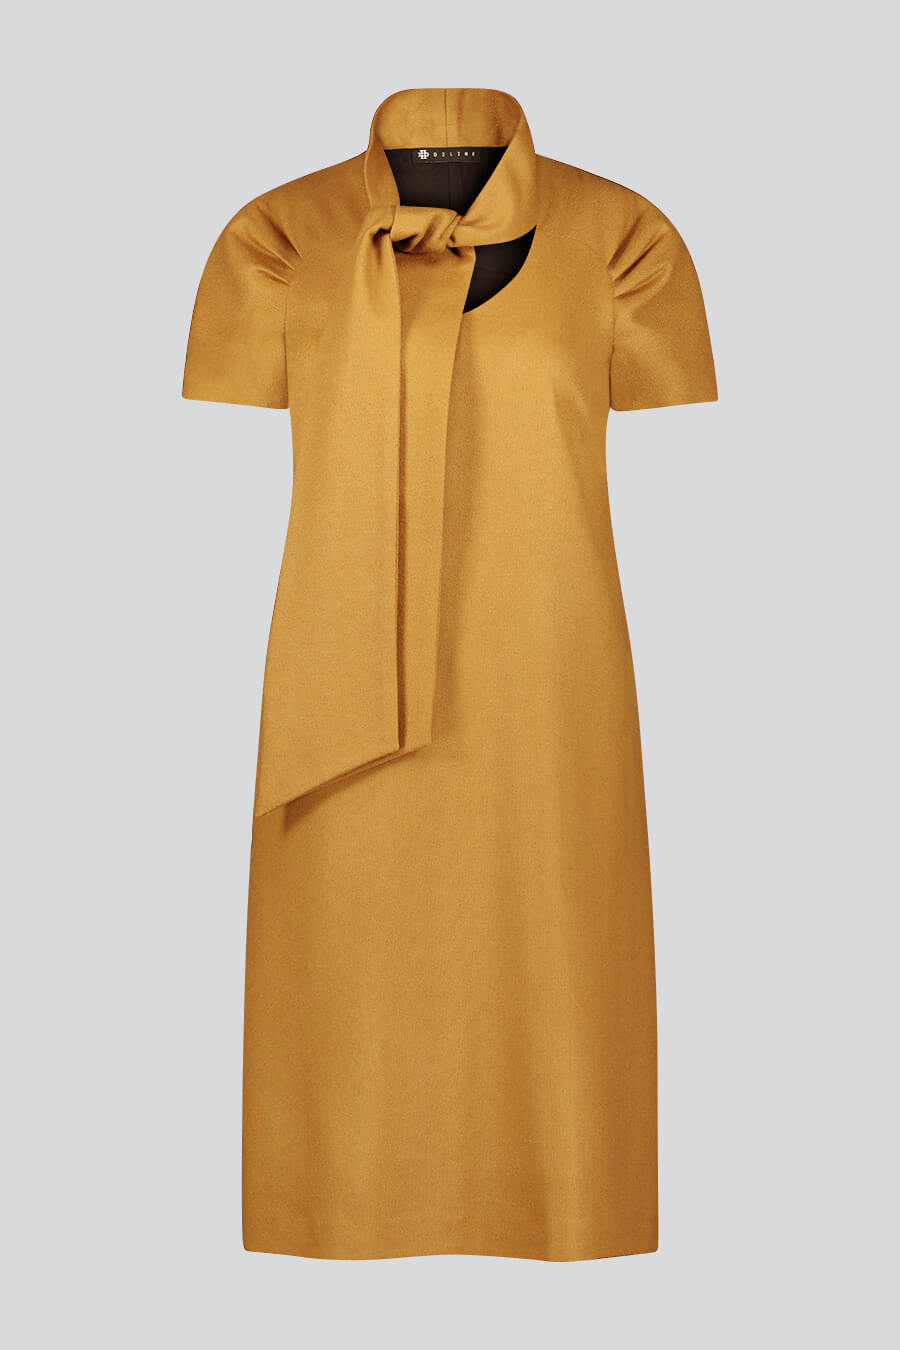 Merino wool a-line dress with v-neck and short sleeves in camel | D2line